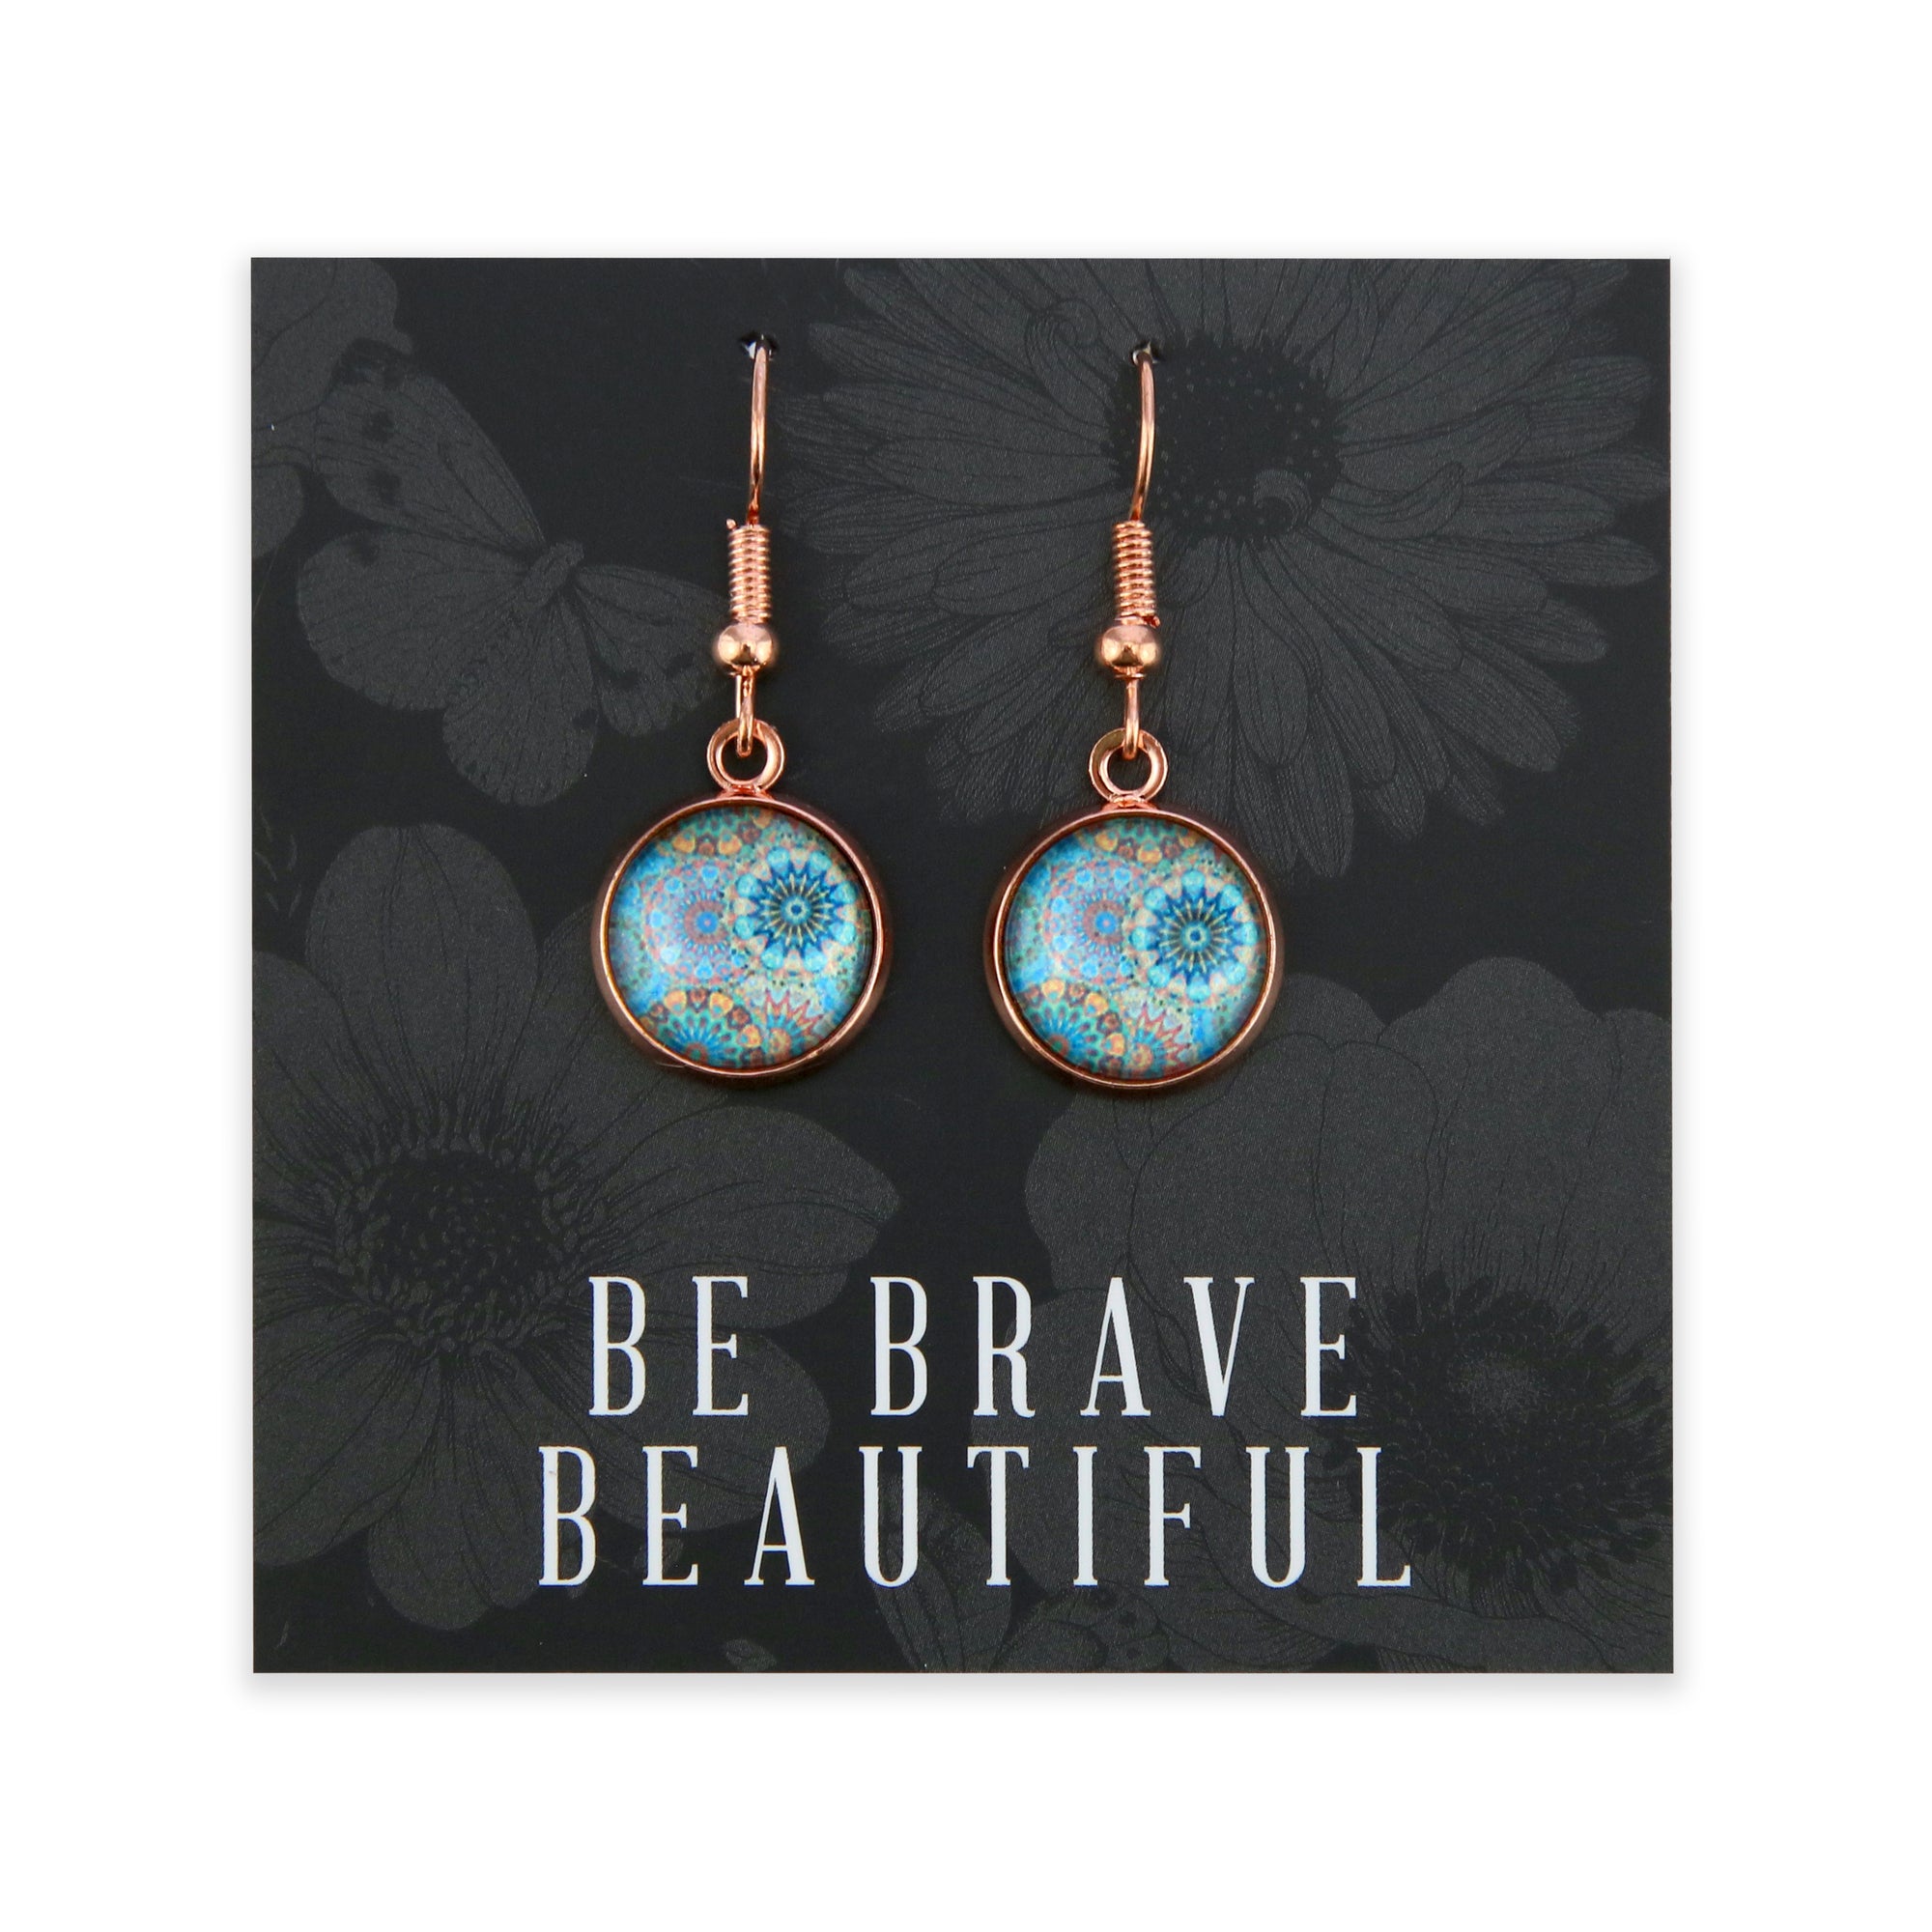 TEAL COLLECTION - Be Brave Beautiful - Rose Gold Dangle Earrings - Panama (12155)